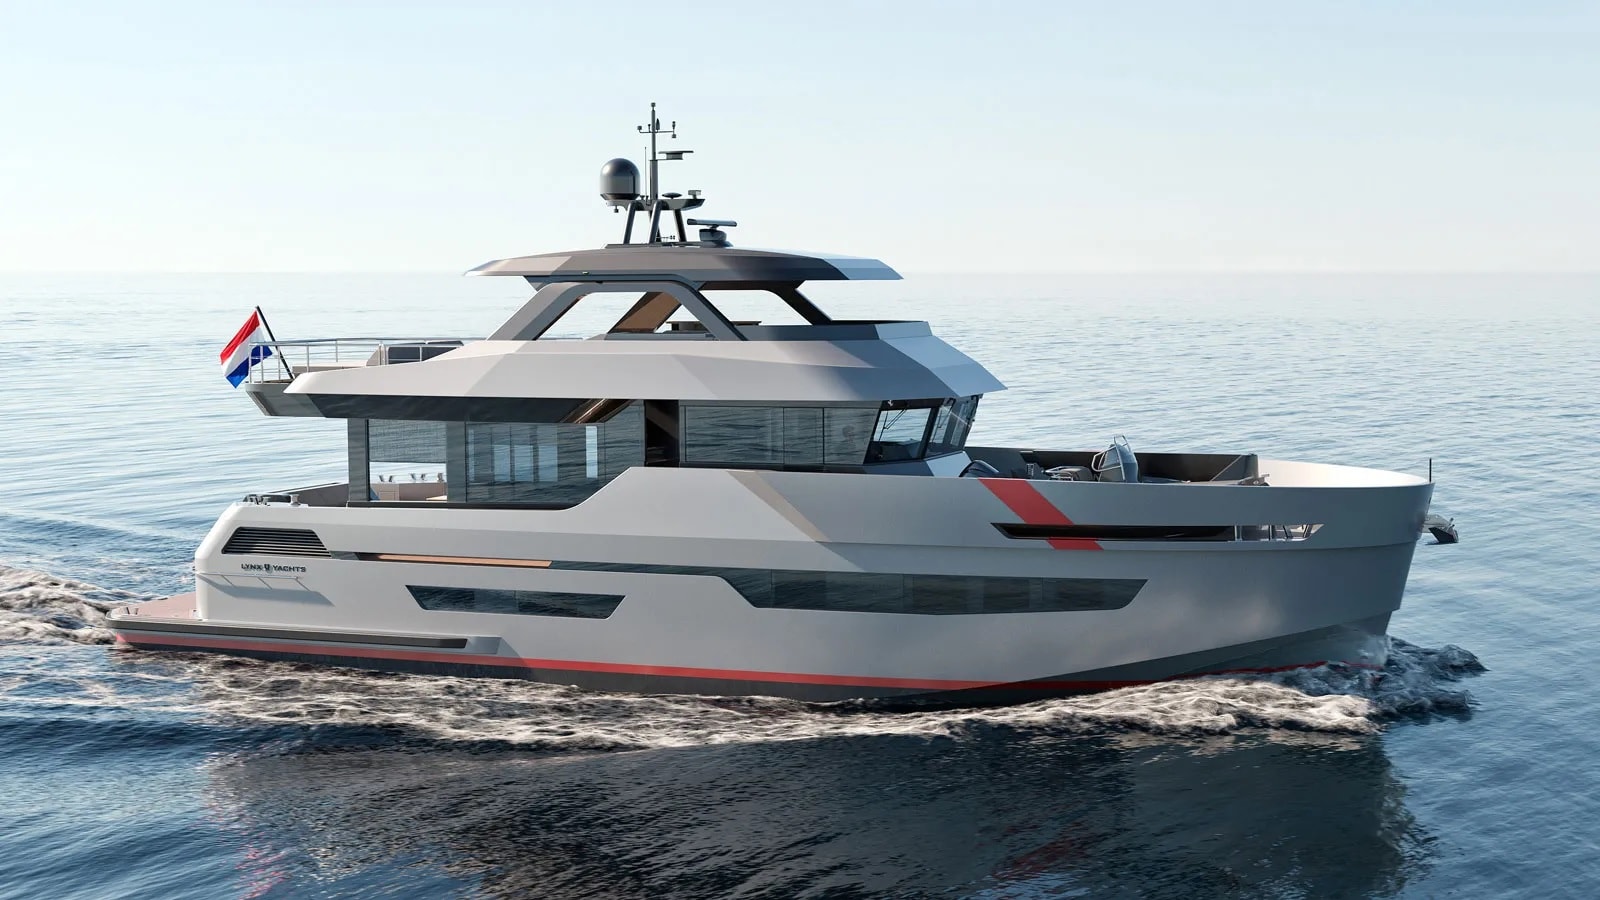 Lynx Yachts Introduces Customizable Pocket Superyacht That Can